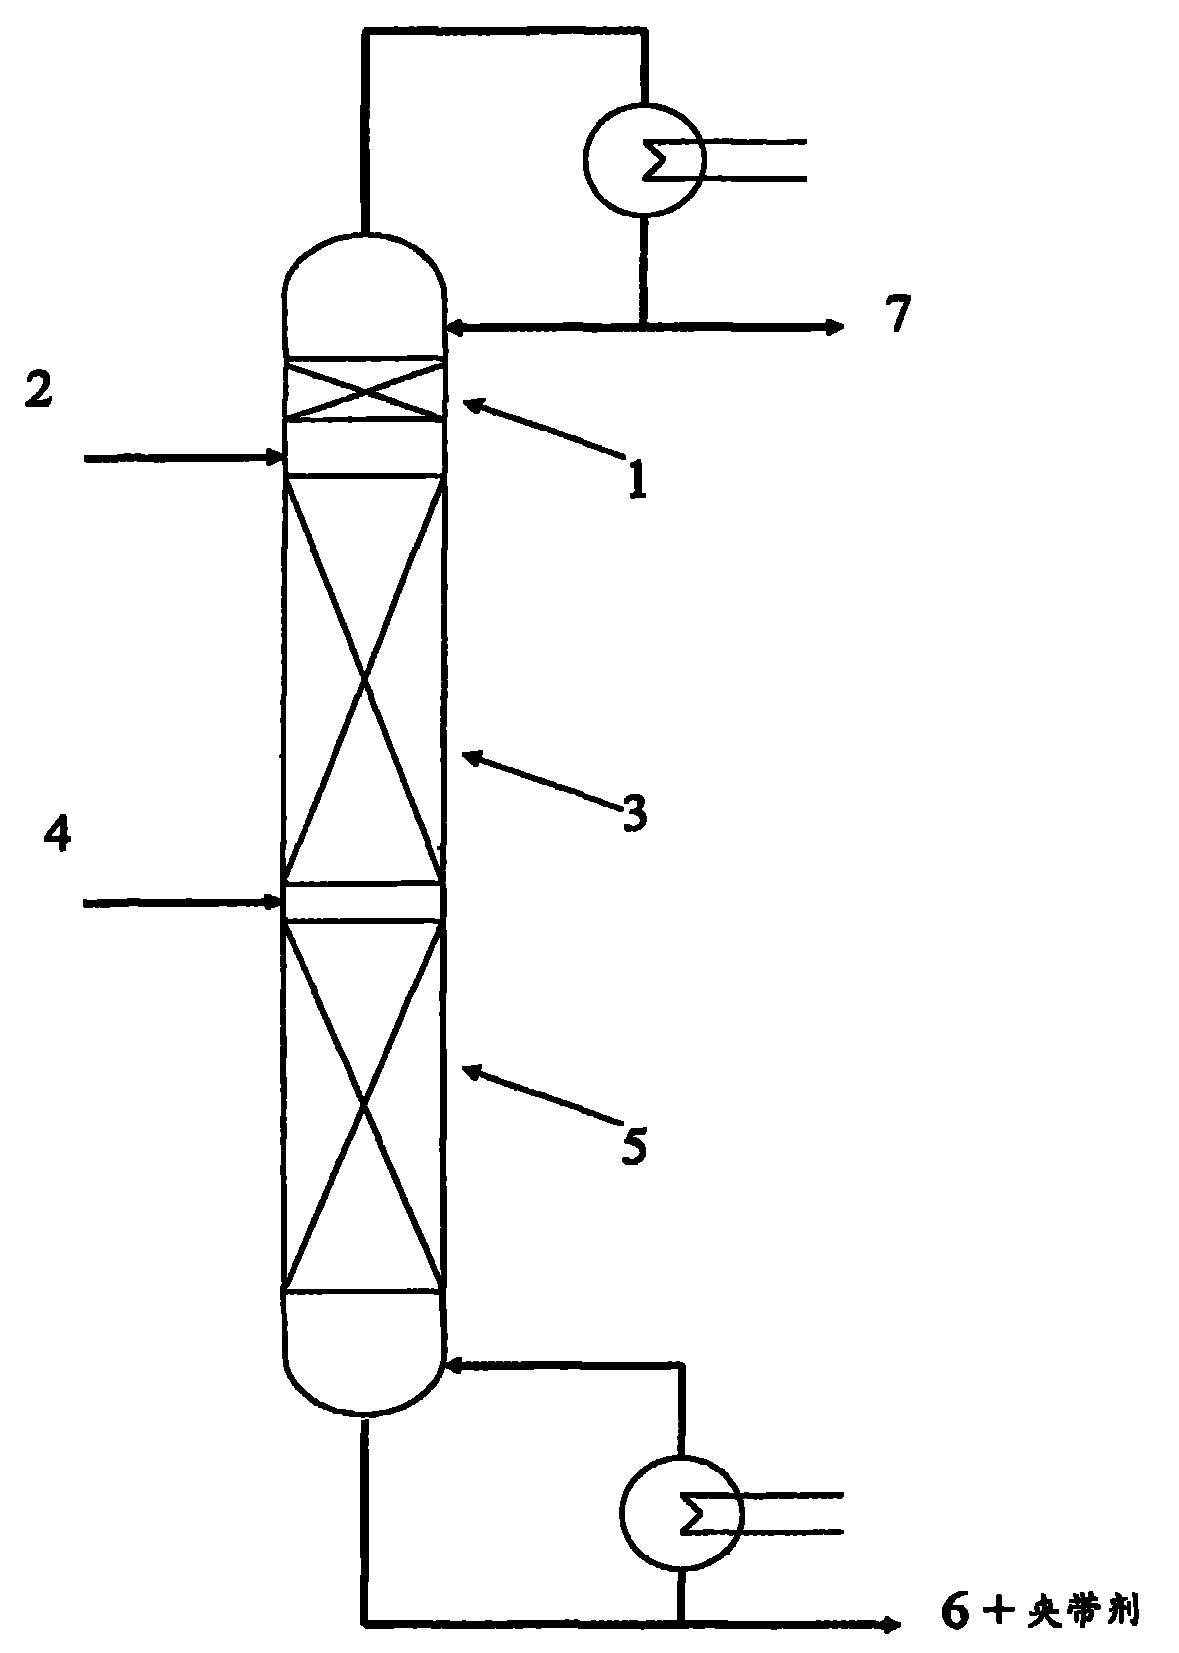 Process for the separation of fluorocarbons using ionic liquids